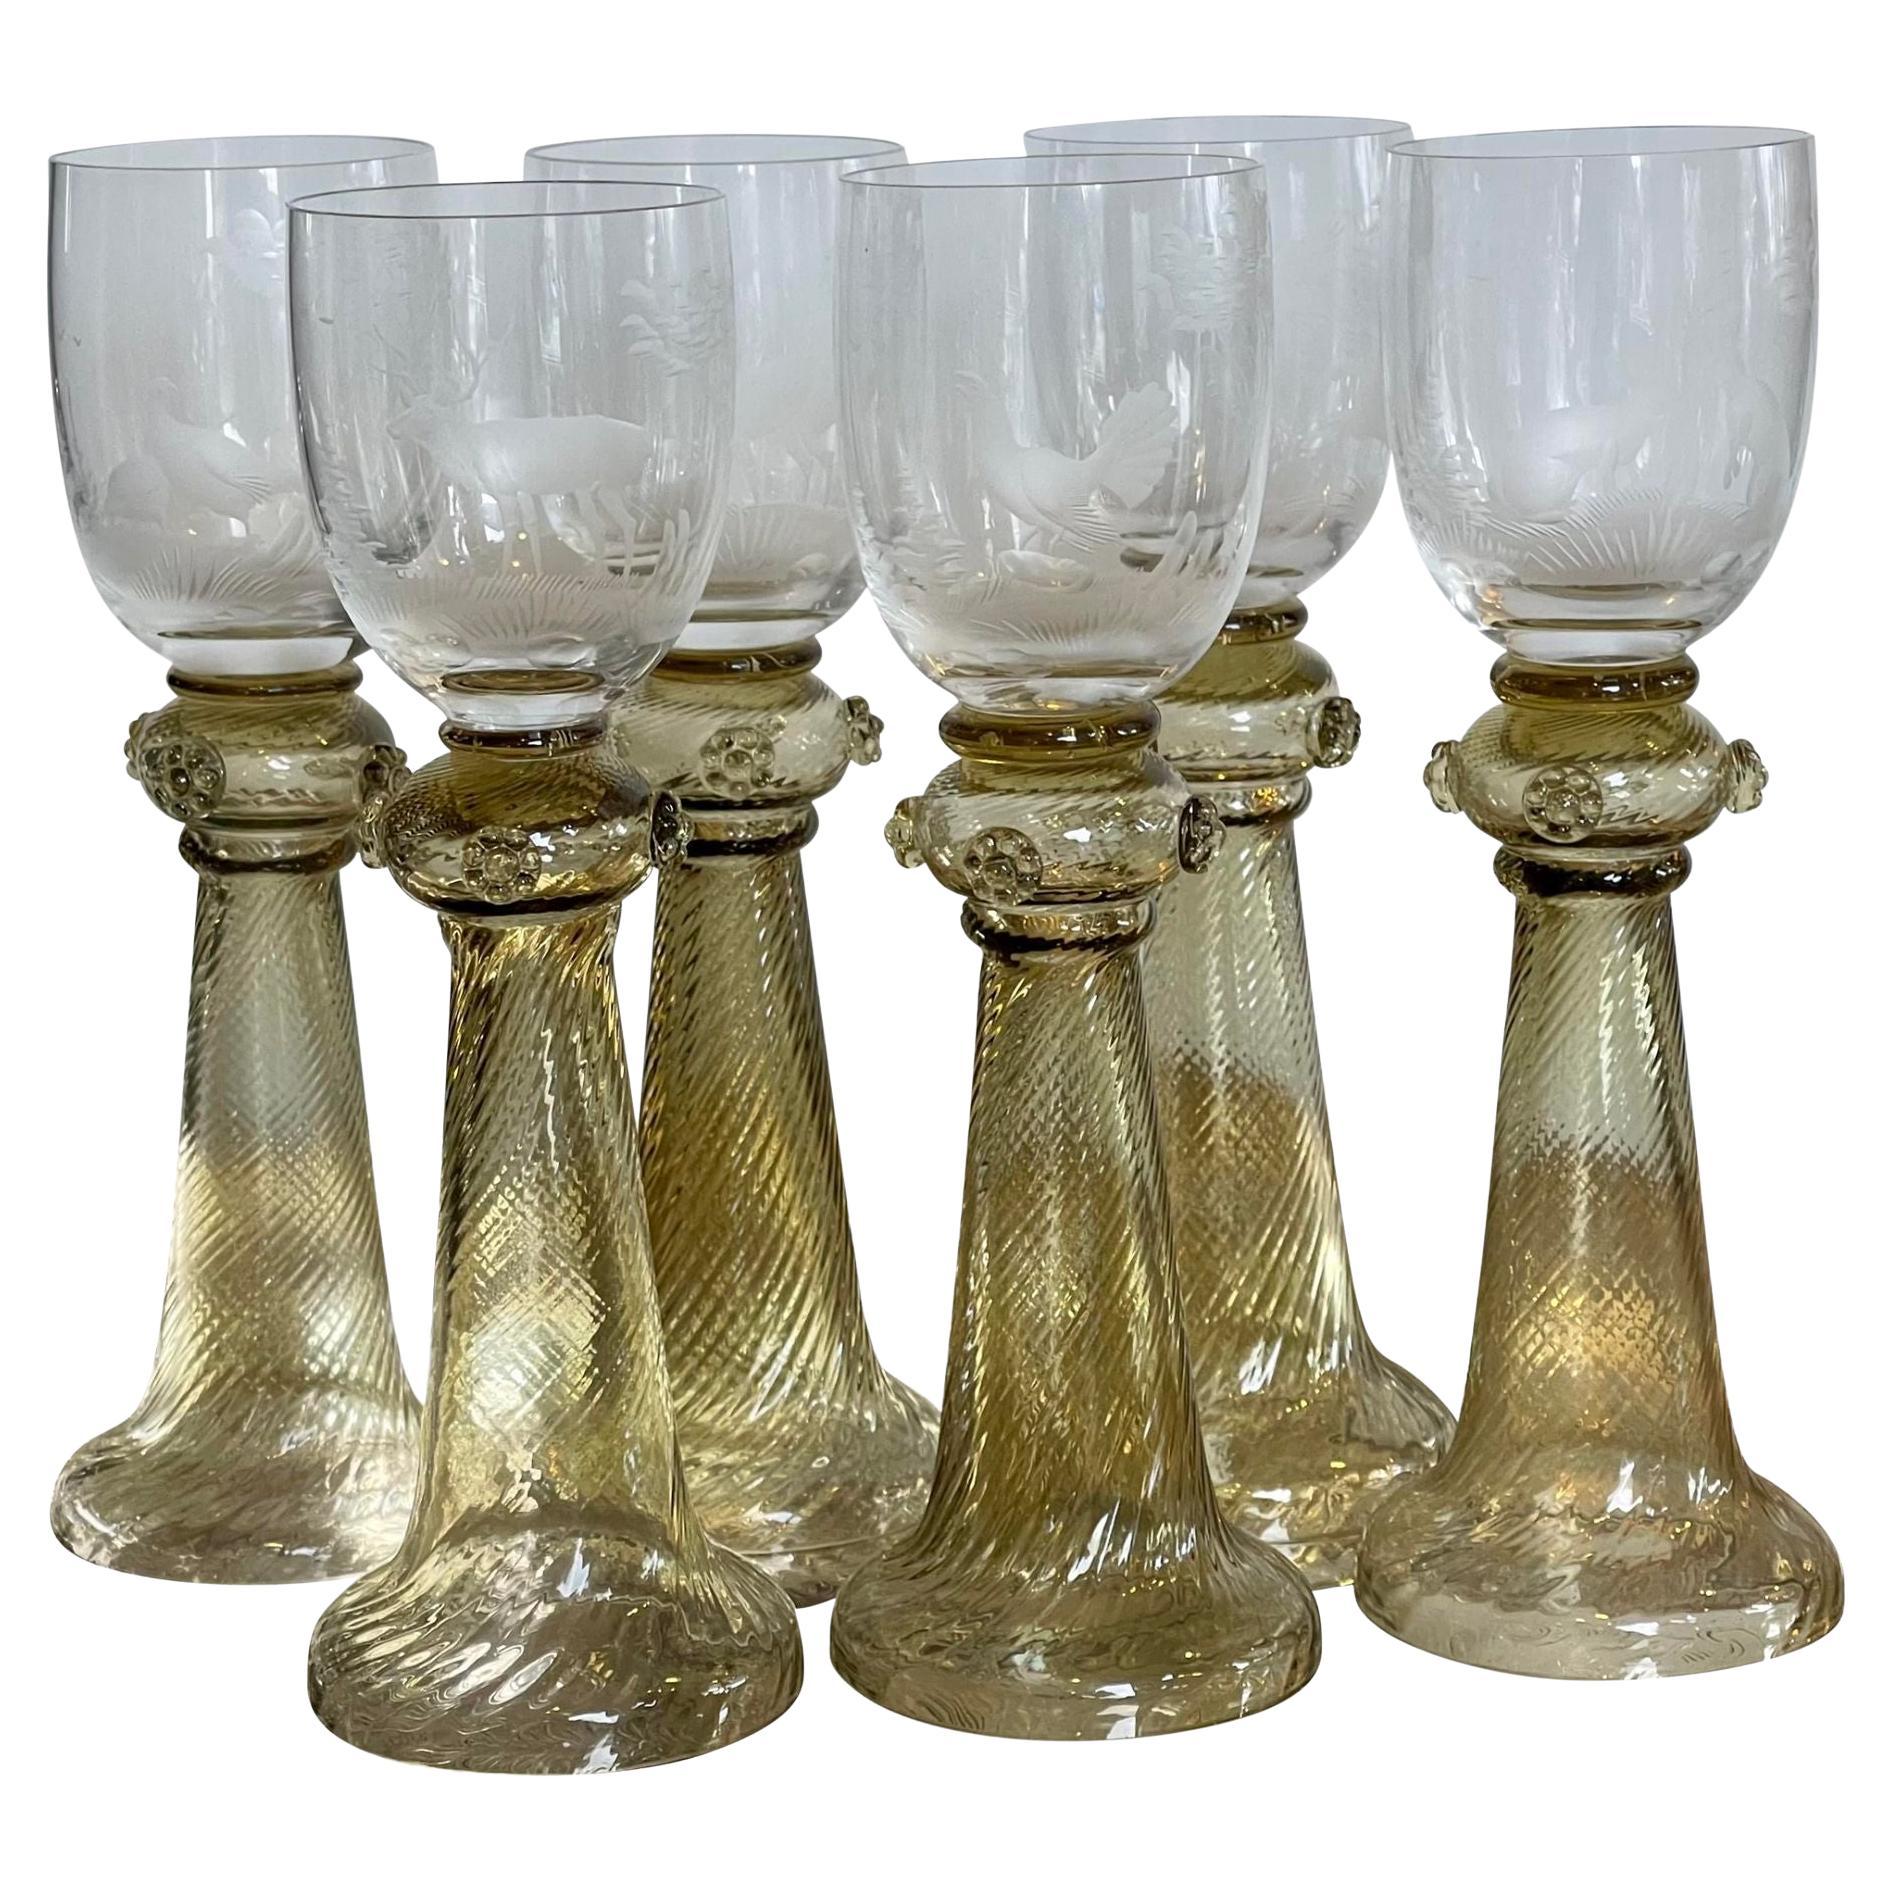 https://a.1stdibscdn.com/set-of-6-gorsuch-glass-hunt-wine-stems-with-engraved-animals-for-sale/22569652/f_325689221675395851392/f_32568922_1675395852150_bg_processed.jpg